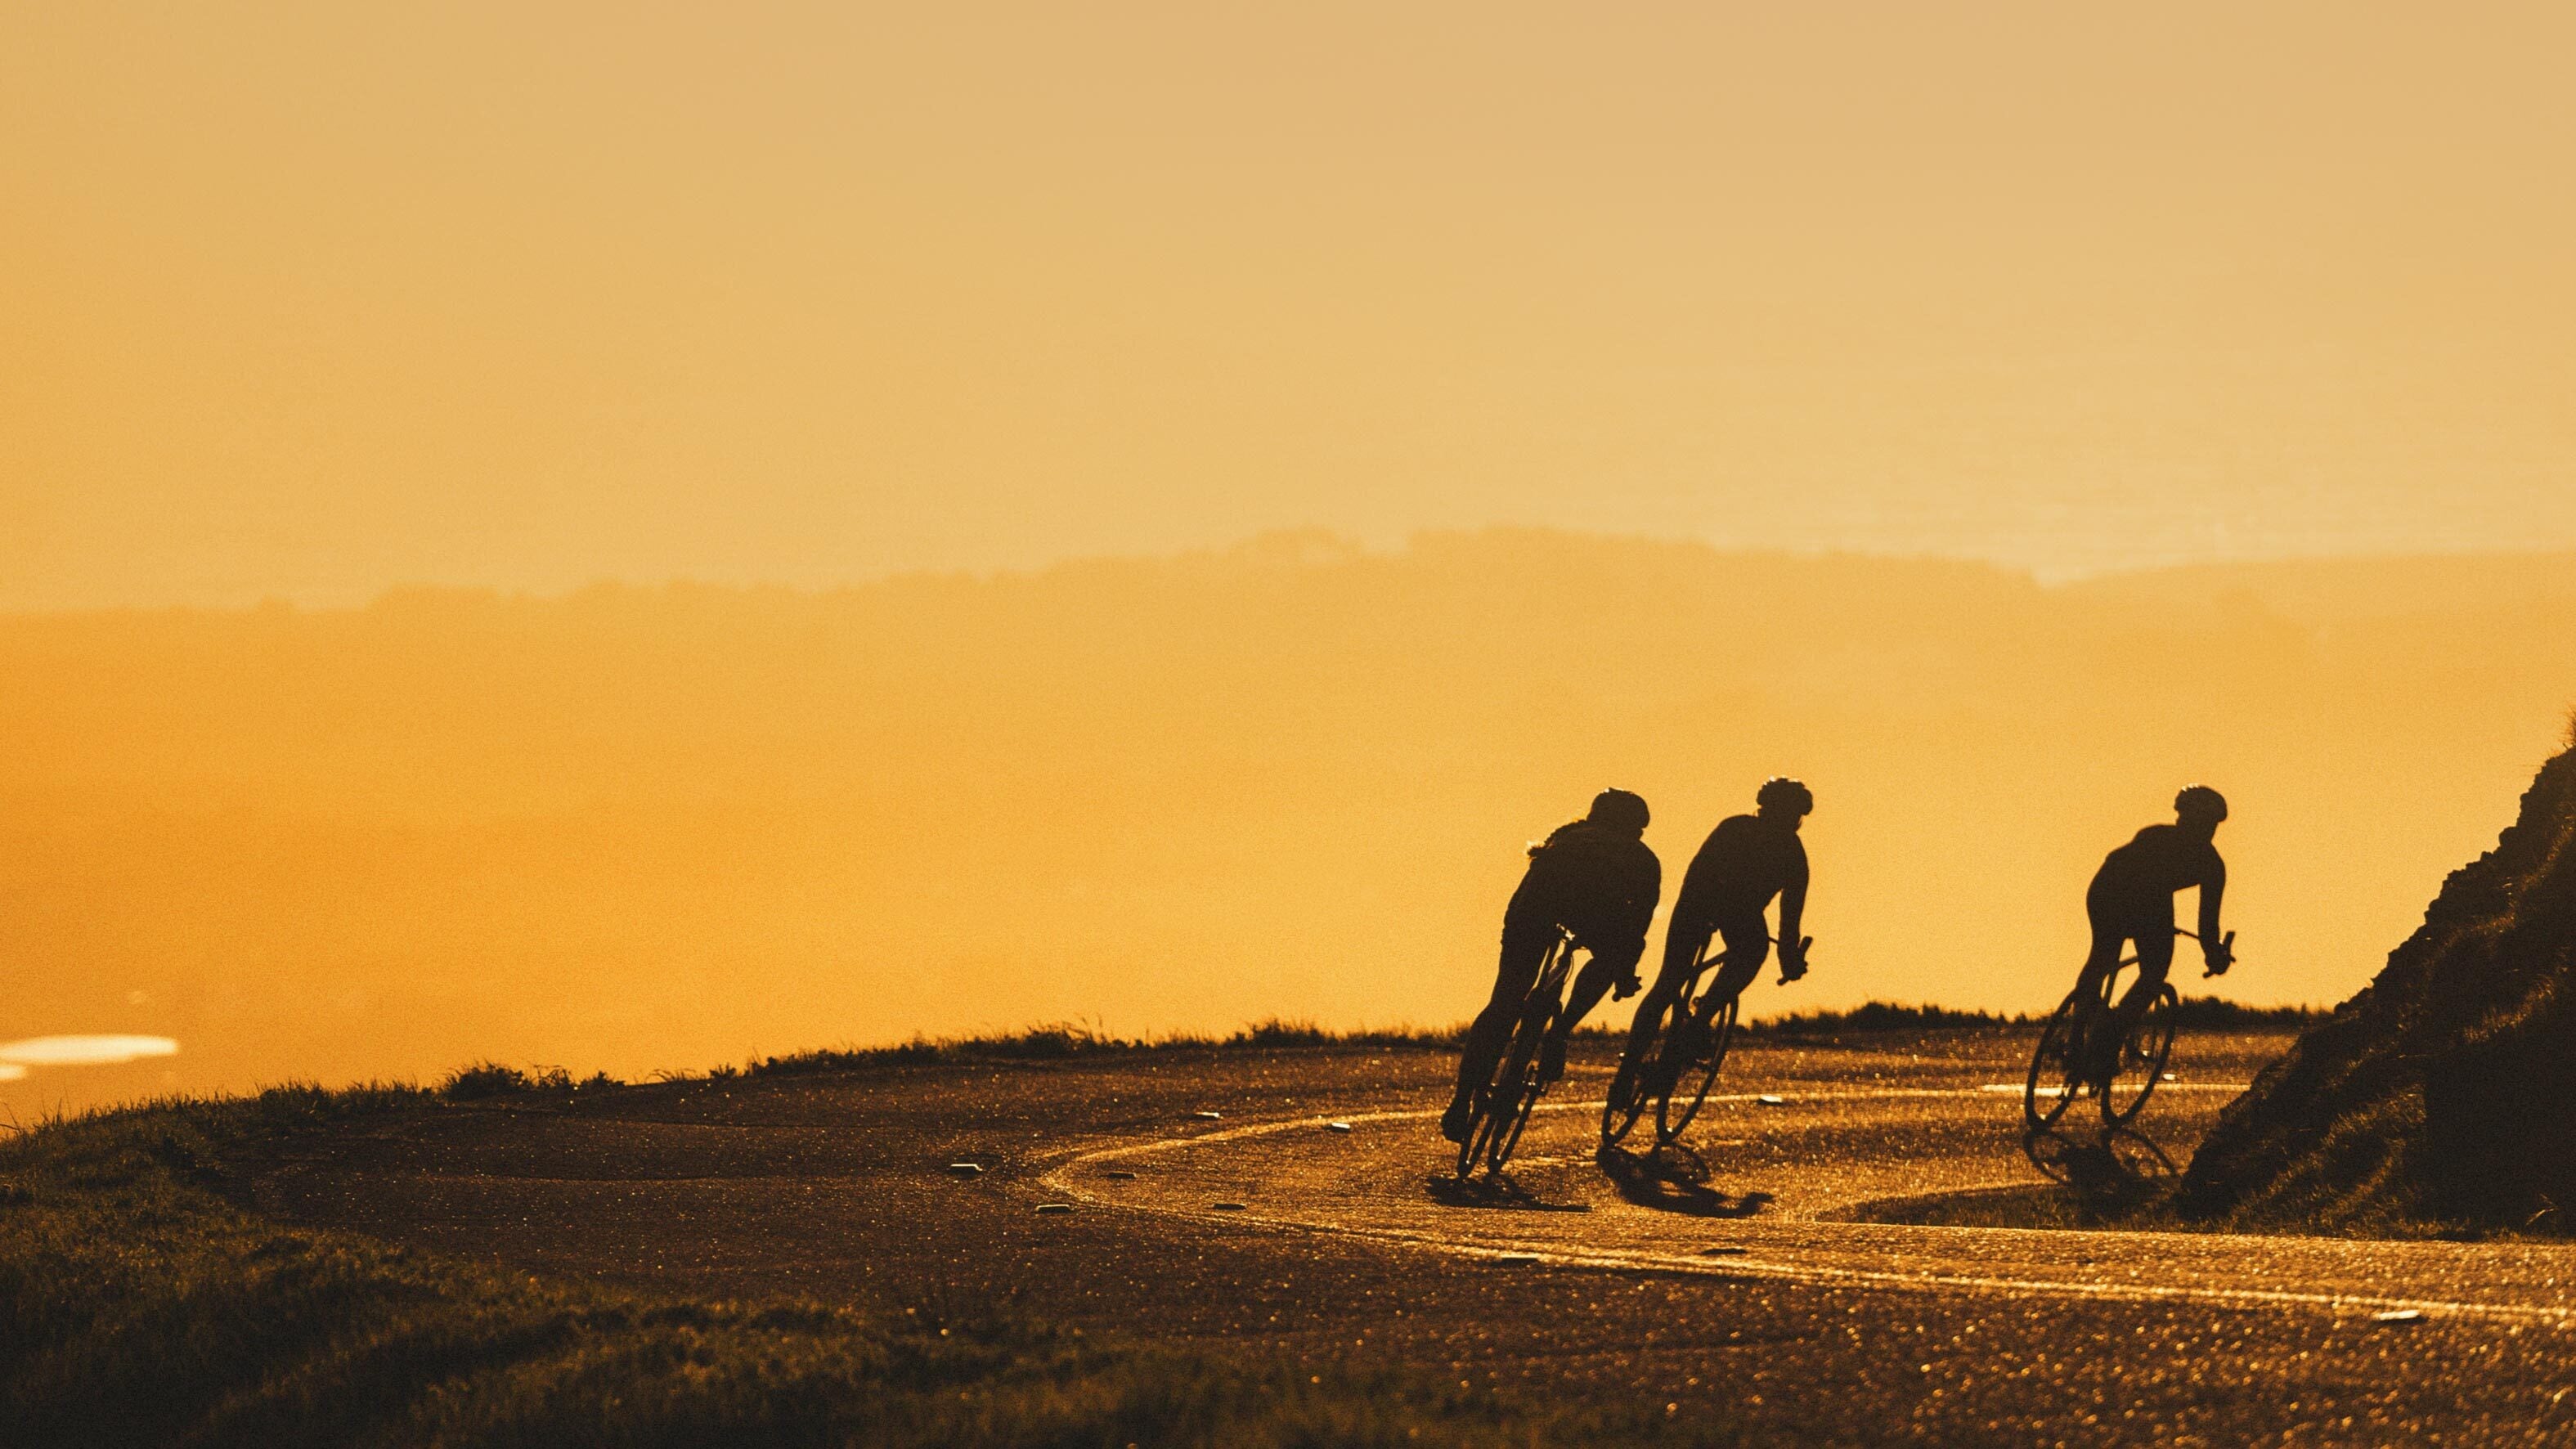 Silhouetted cyclists climbing a hill against an atmospheric, yellow-orange sunrise, evoking the energy of early morning rides @ Bici.